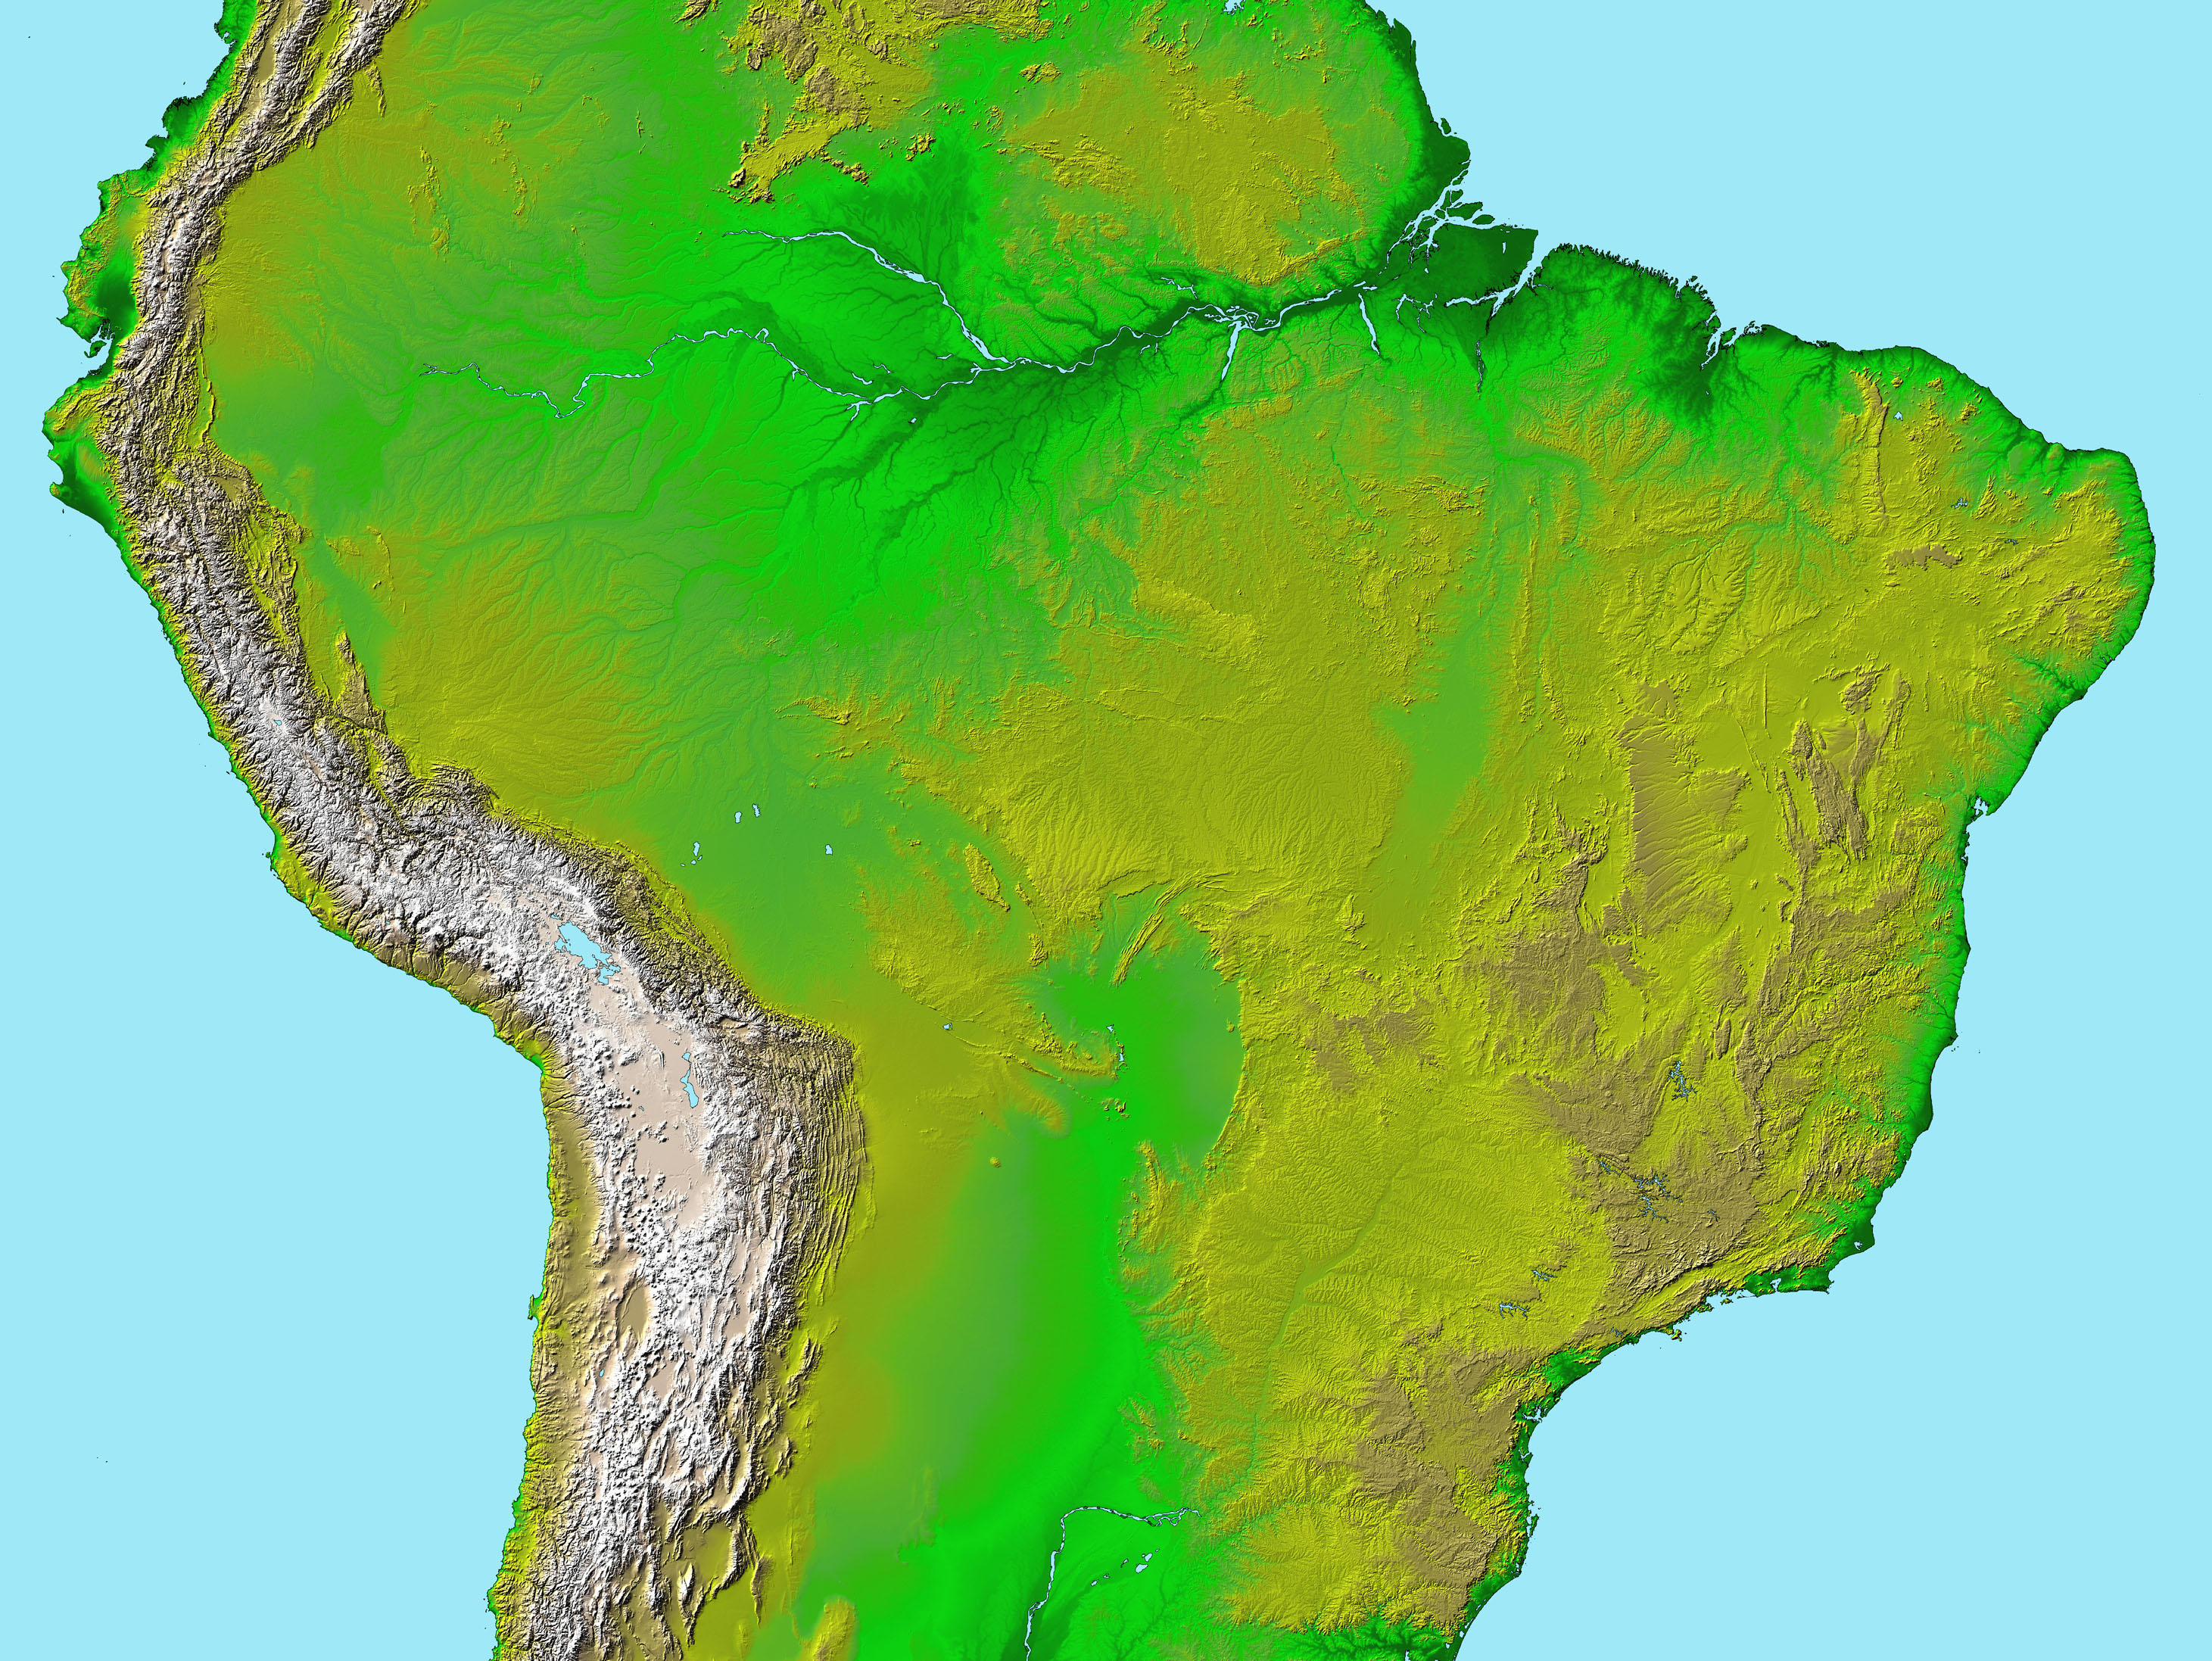 South America topography